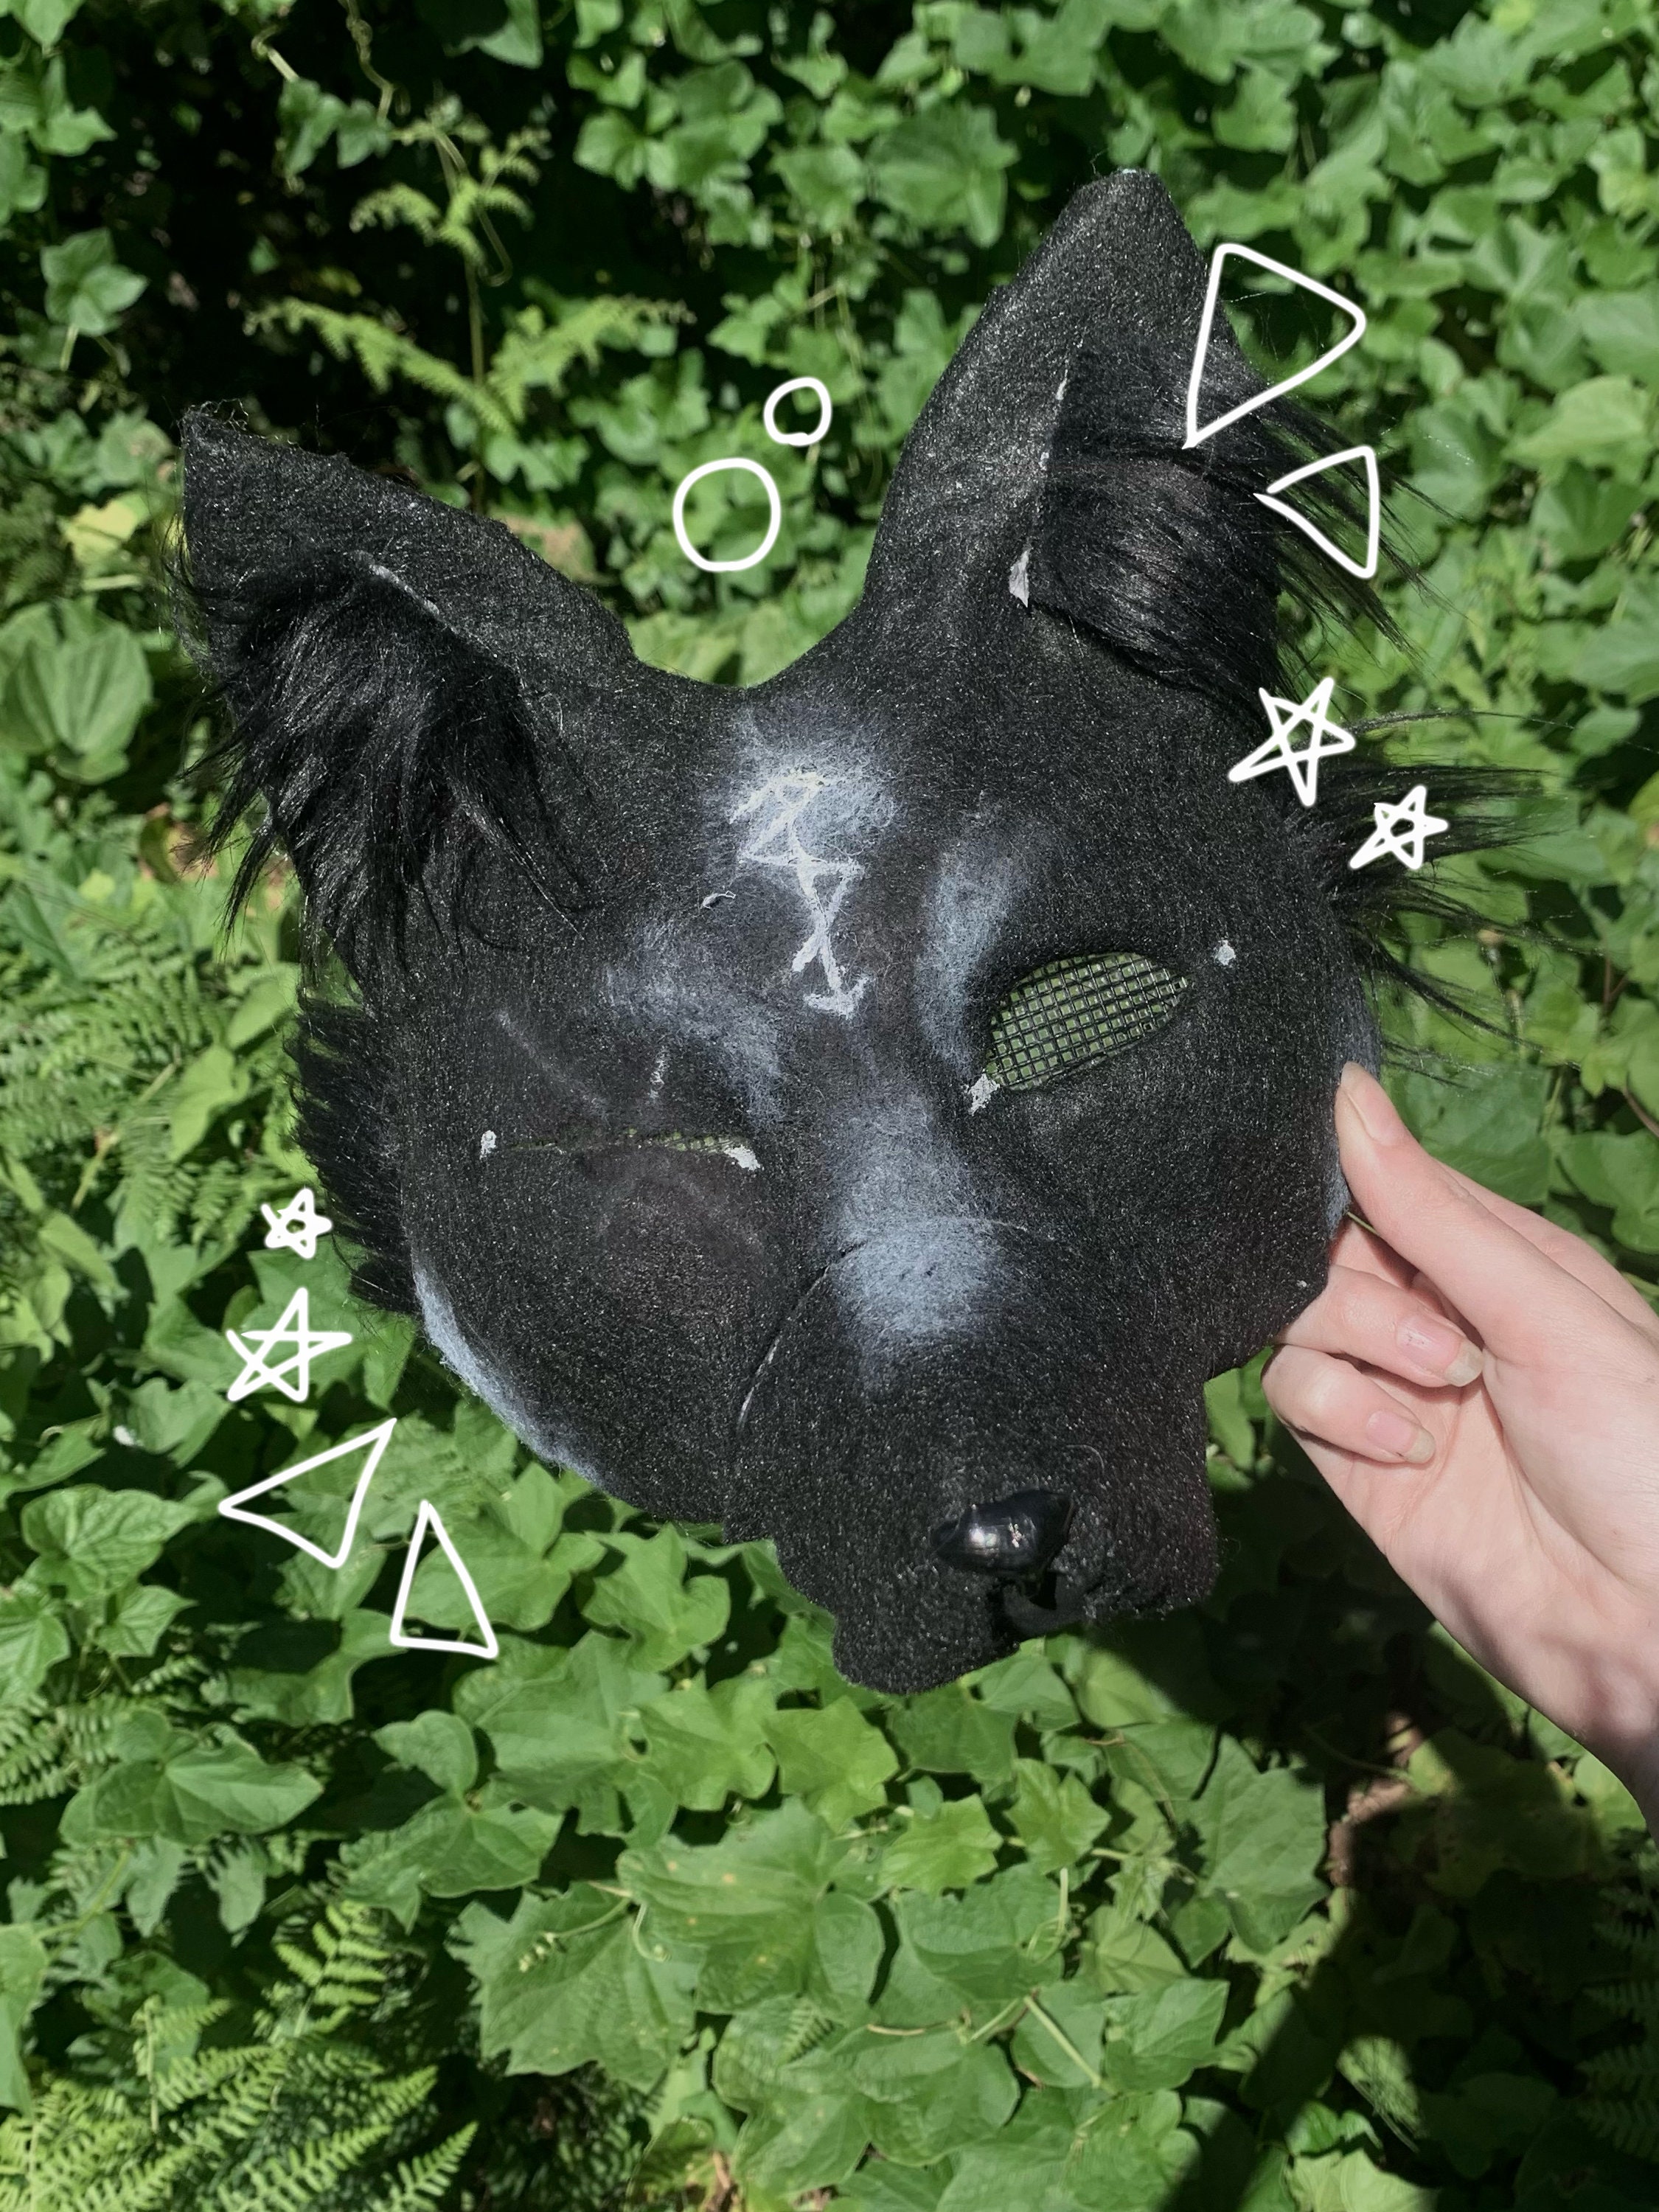 New listing now live in my #shop 🐺 #werewolf #greywolf #blackandwhite # therian #wolf #costume #mask #maskmaking #…